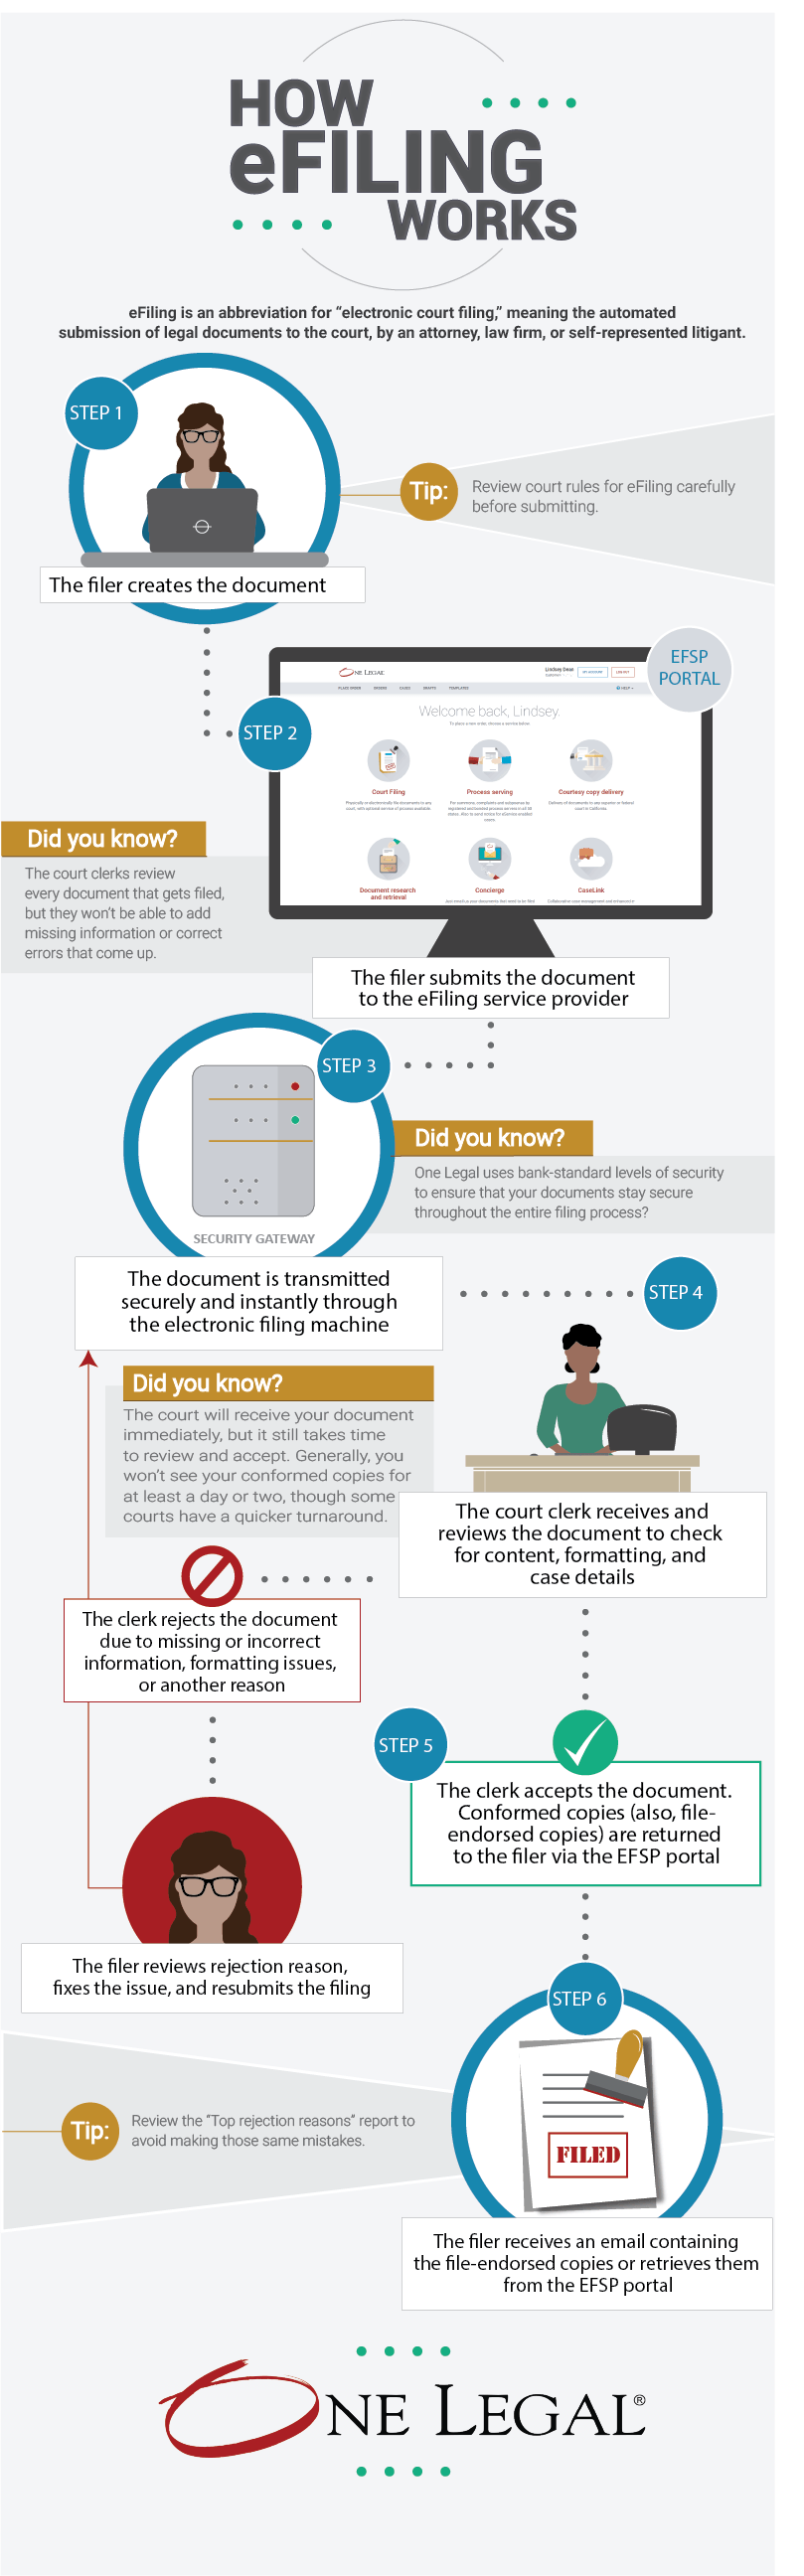 How eFiling works (infographic)